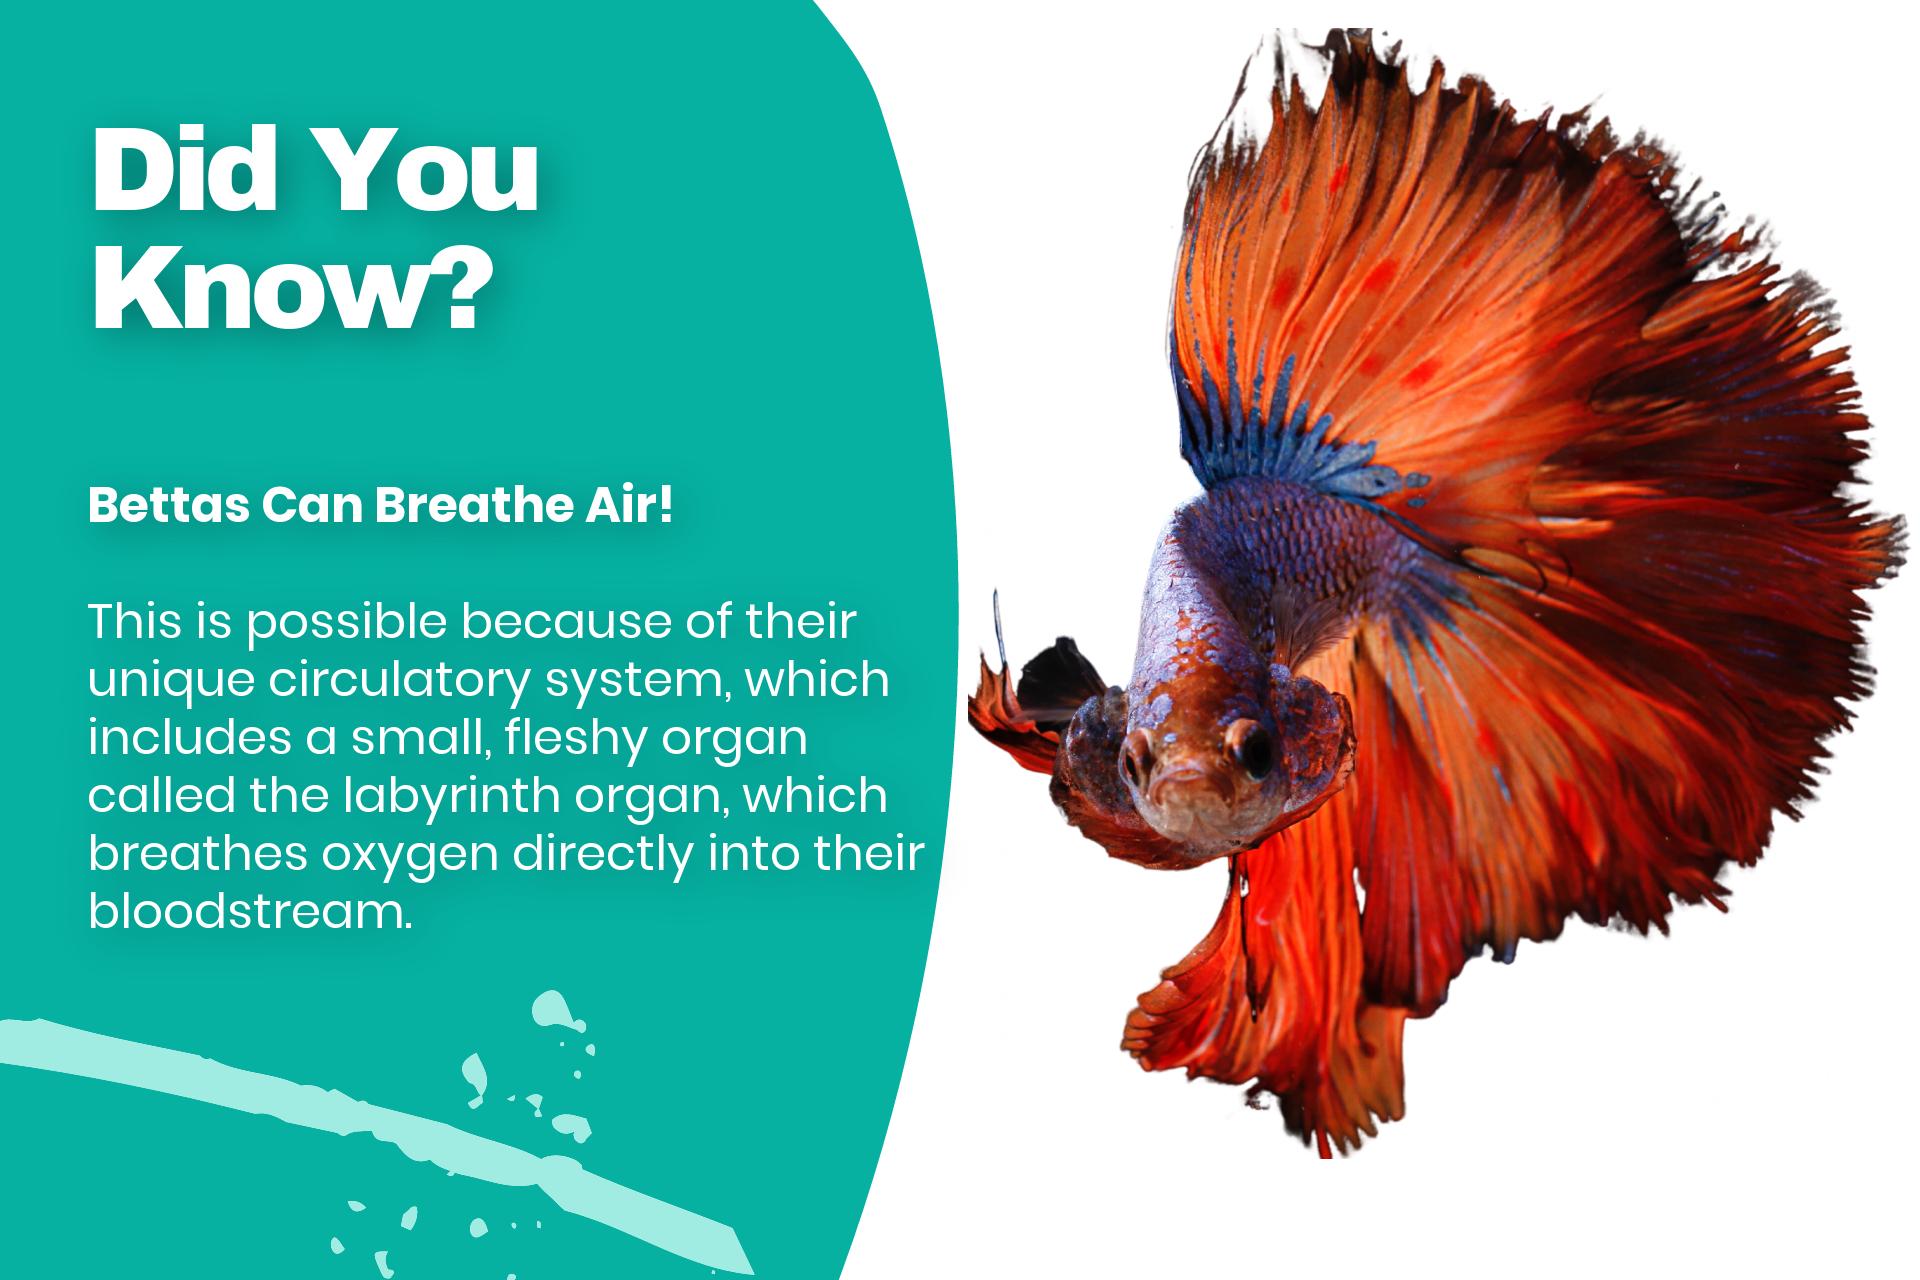 Bettas Can Breathe Air! This is possible because of their unique circulatory system, which includes a small, fleshy organ called the labyrinth organ, which breathes oxygen directly into their bloodstream.